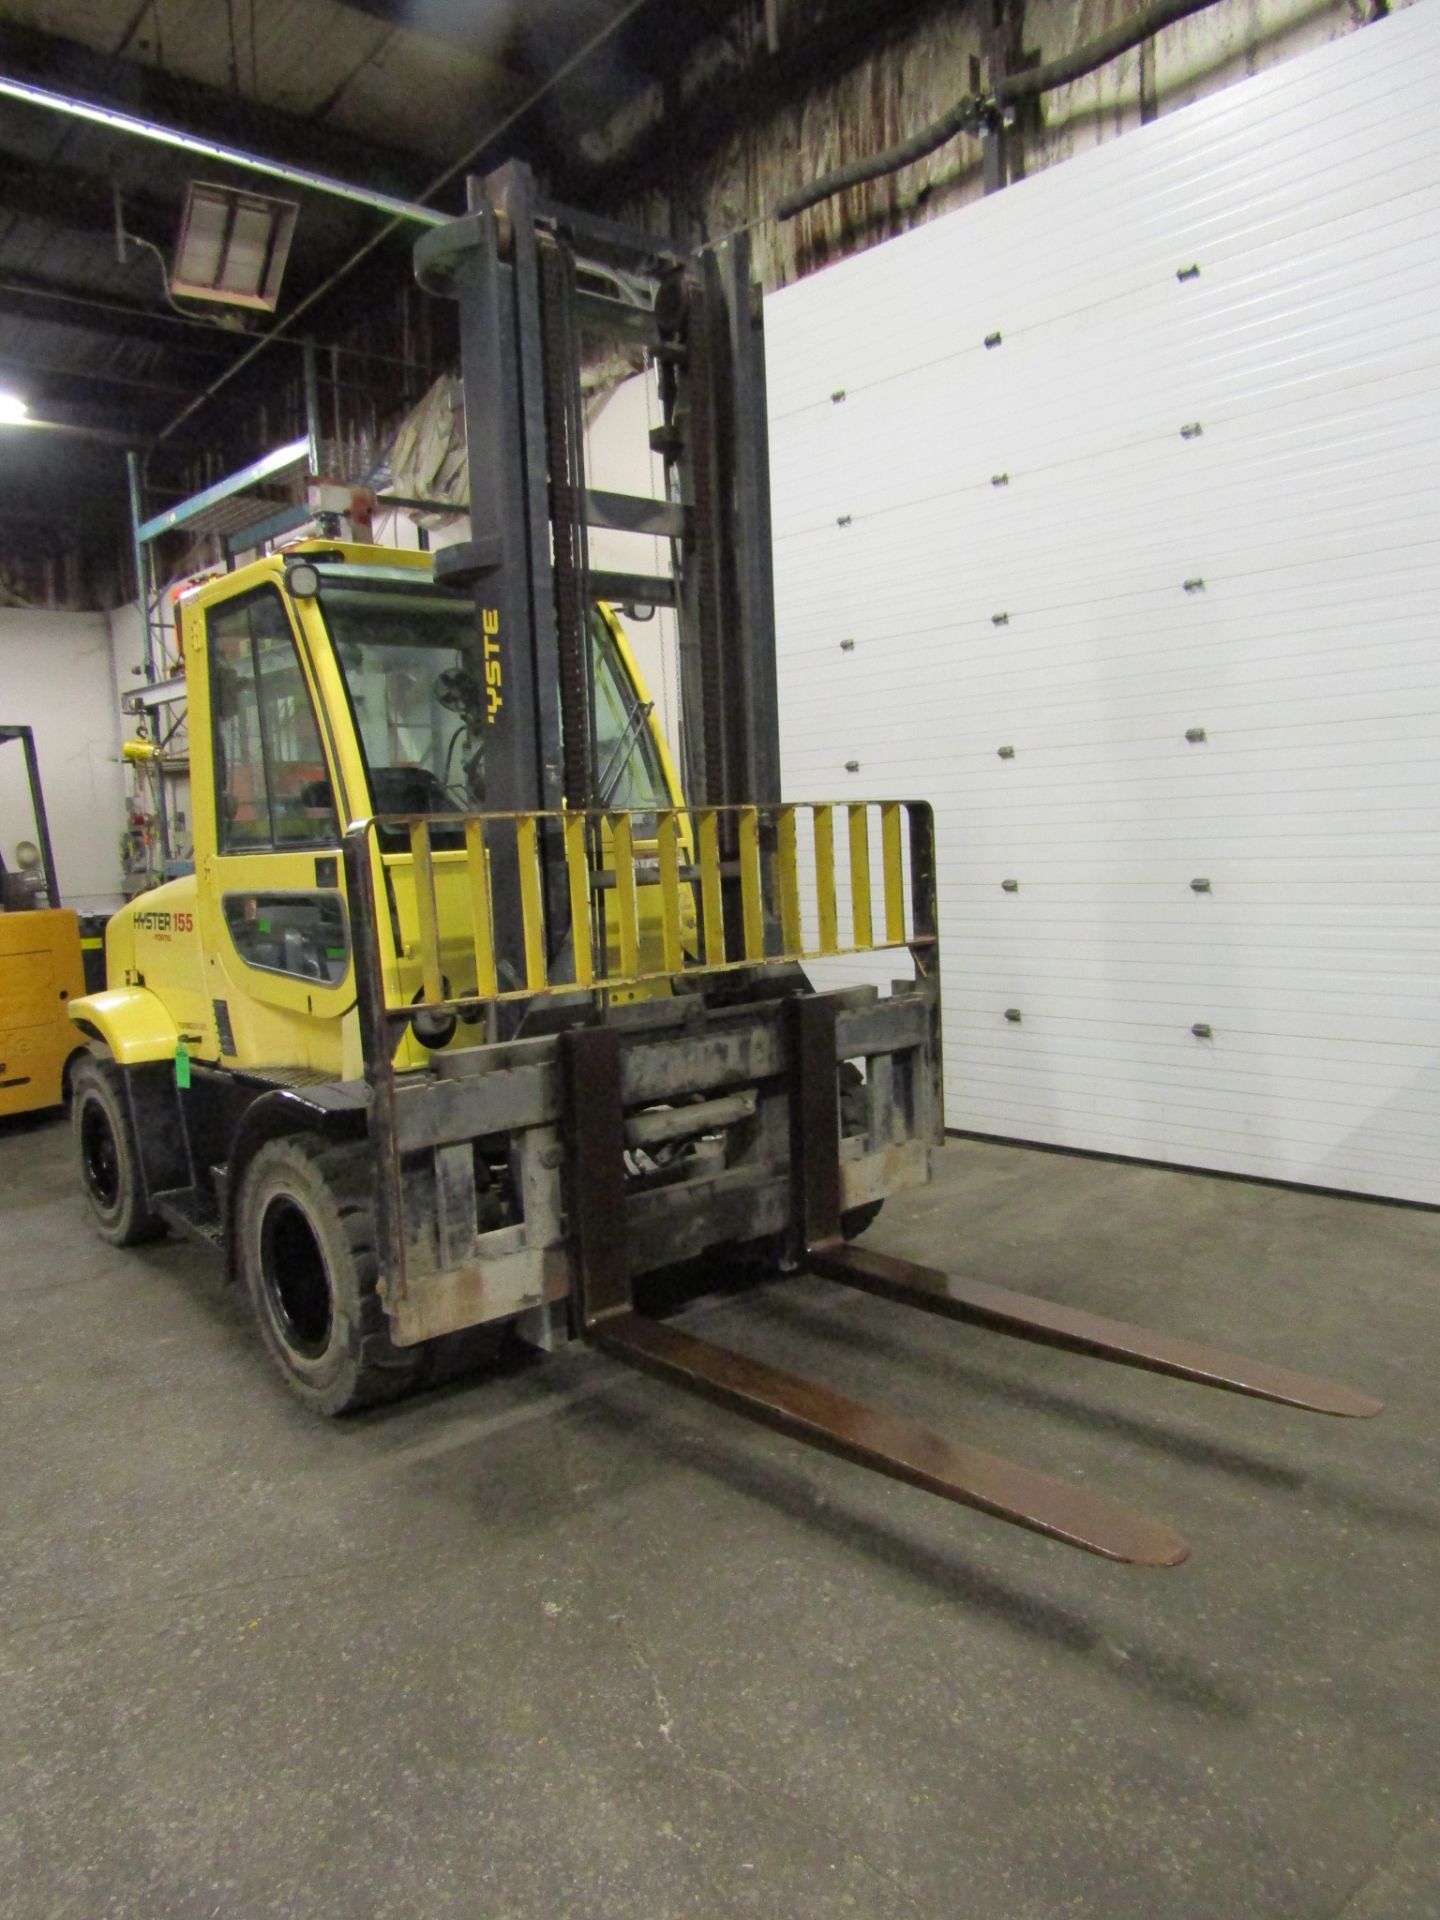 2010 Hyster 15000lbs Capacity OUTDOOR Forklift - Turbo diesel fuel with sideshift - 65" forks - Image 2 of 3